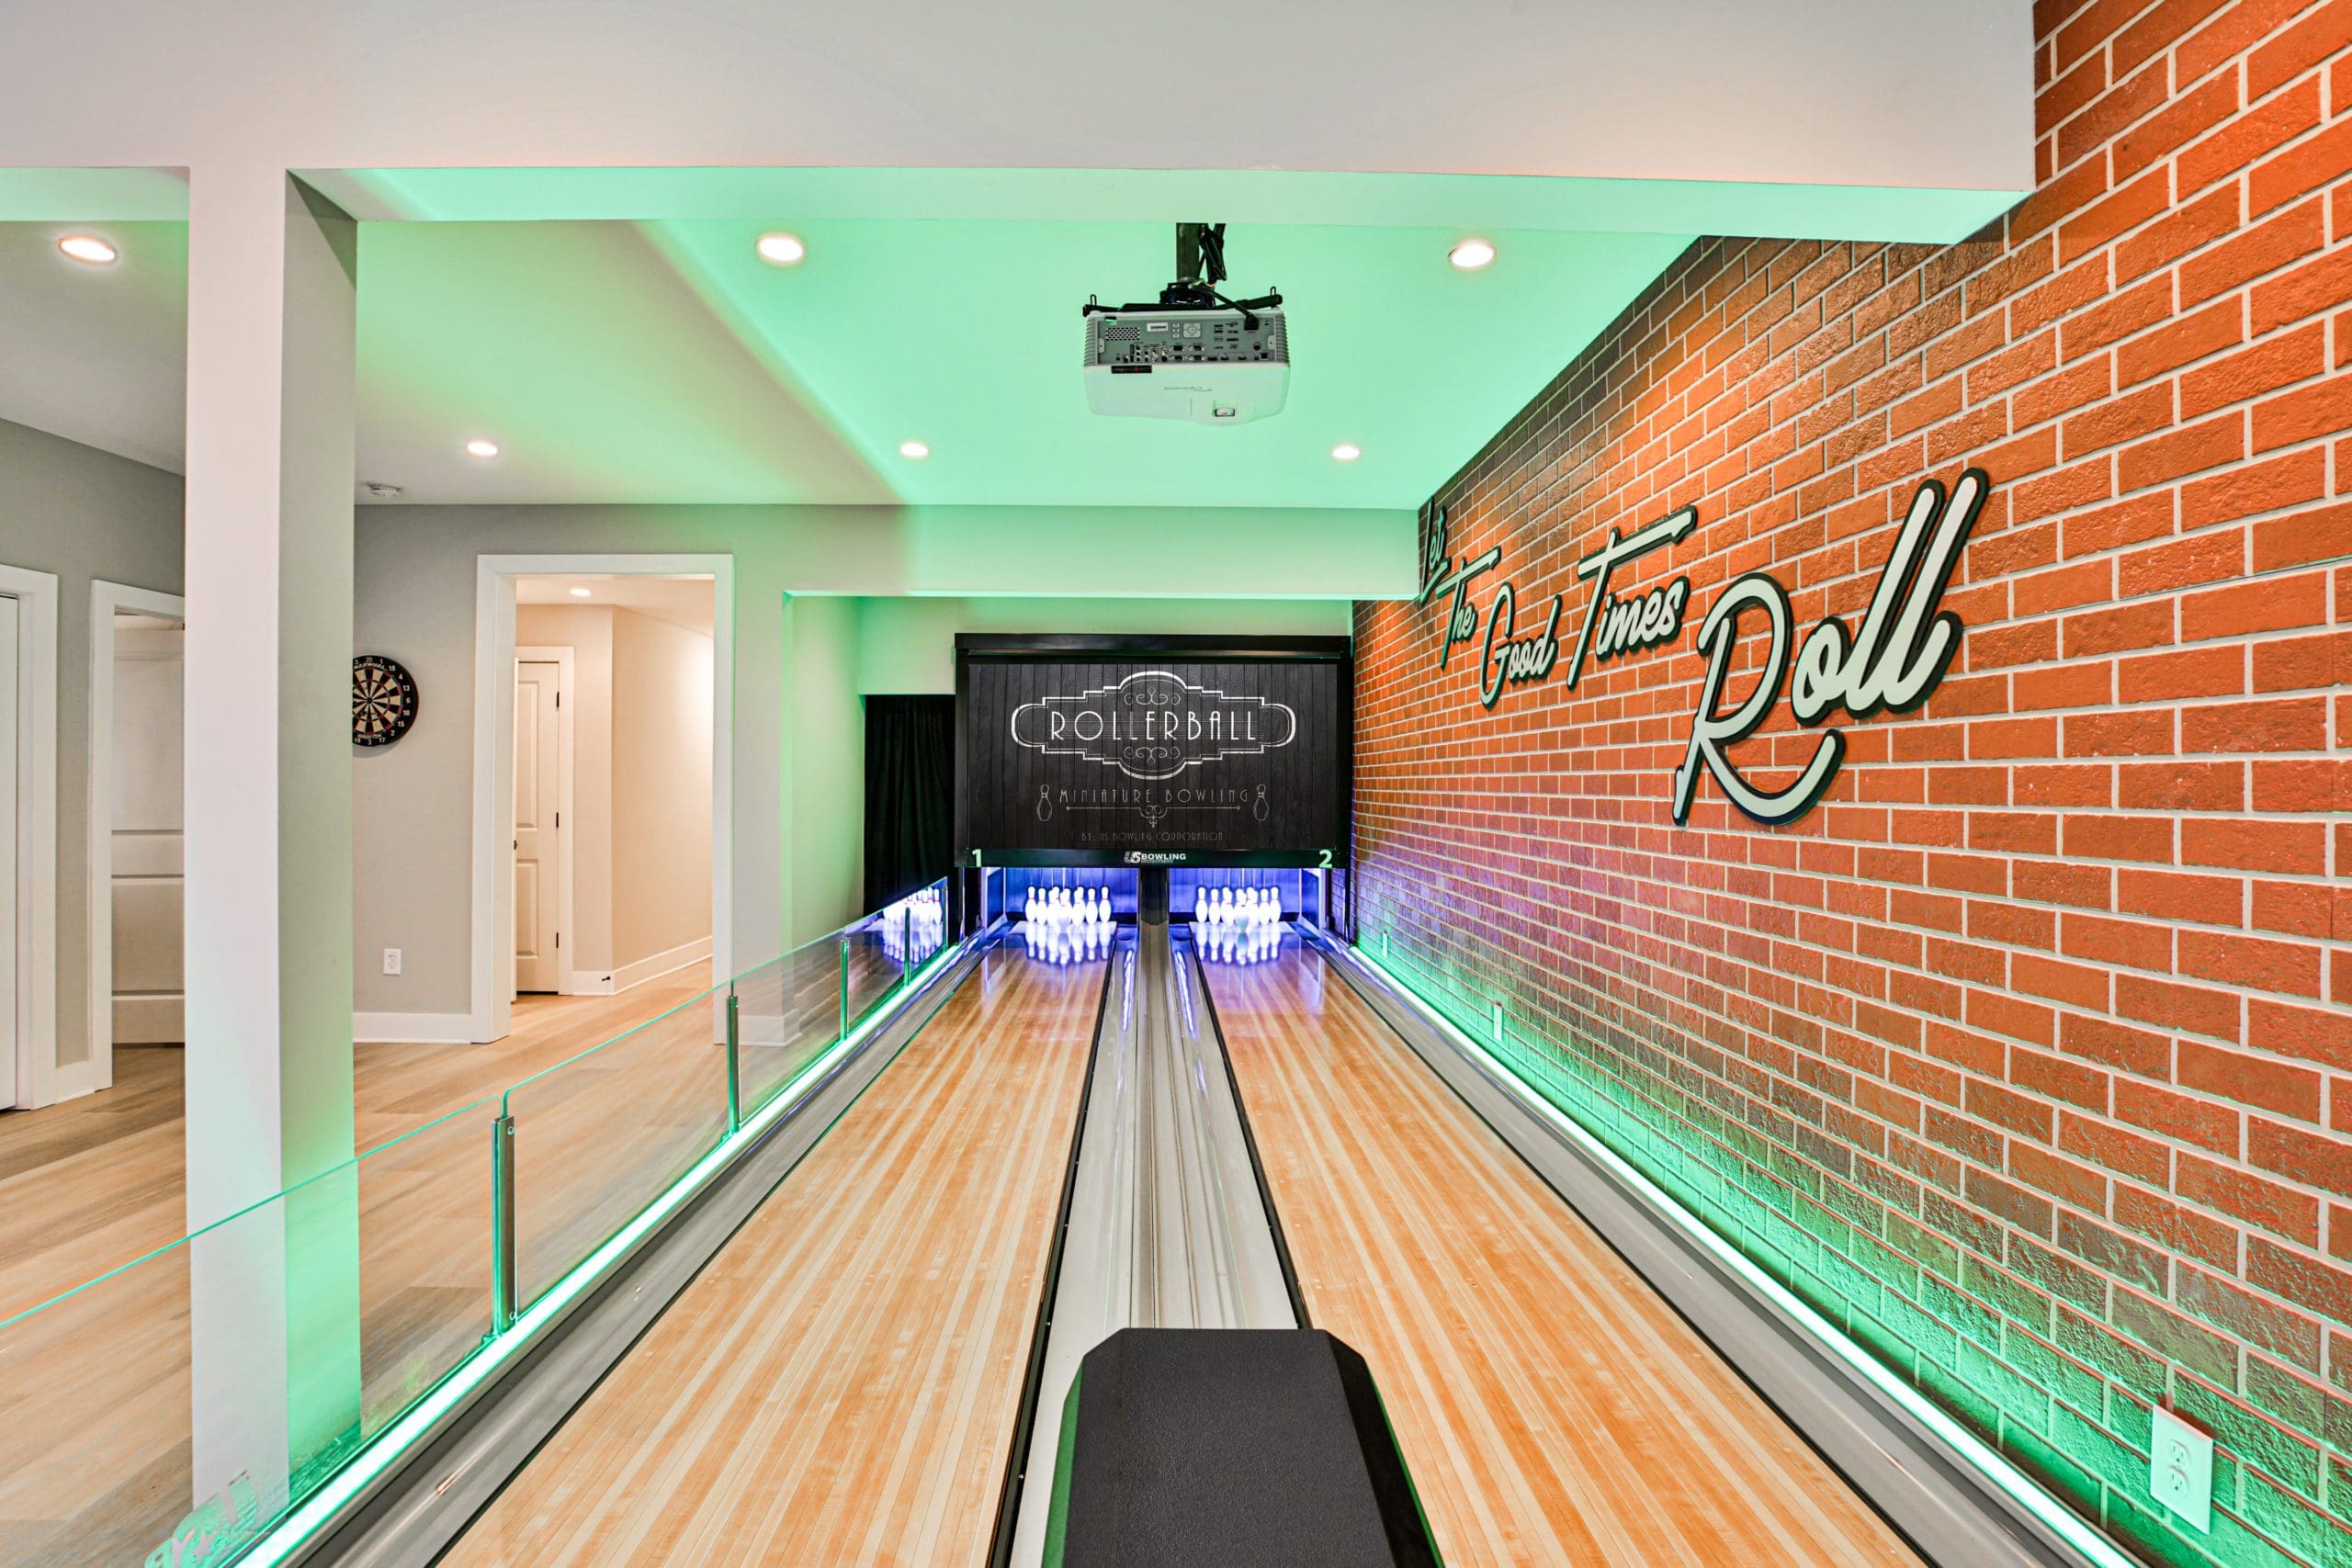 Residential bowling alley - Rock the Block